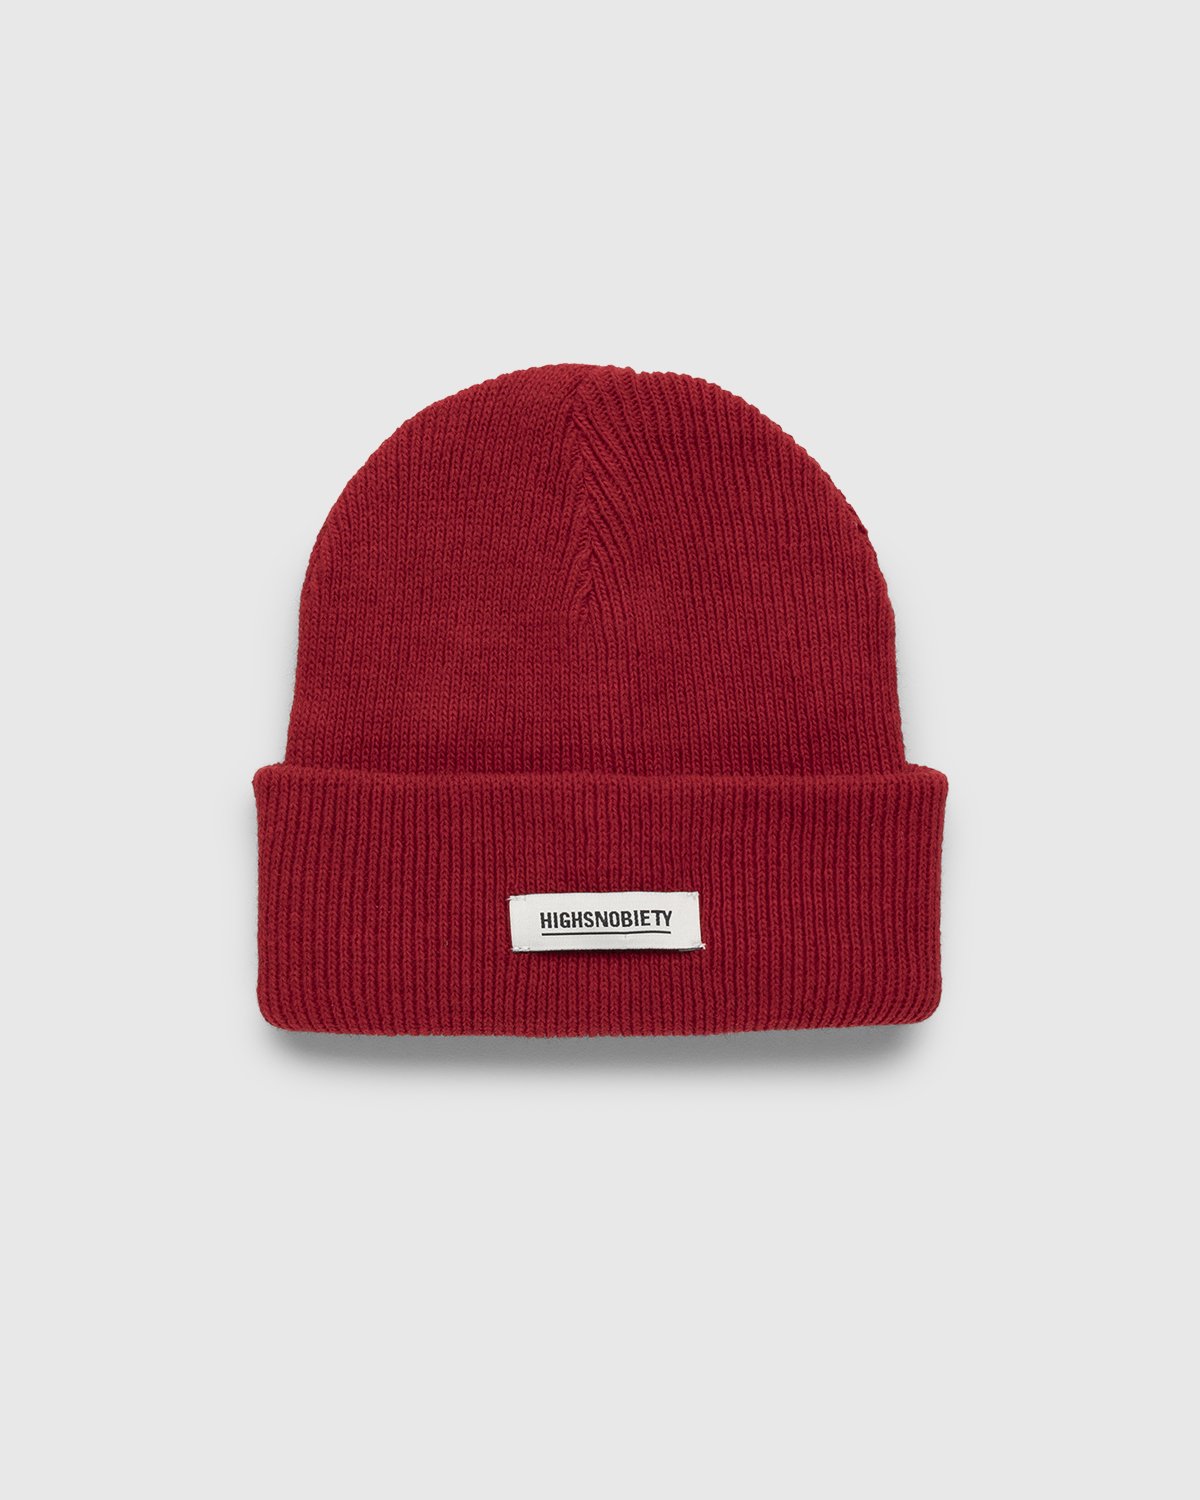 Highsnobiety - Watch Logo Staples Beanie Cardinal Red - Accessories - Red - Image 1